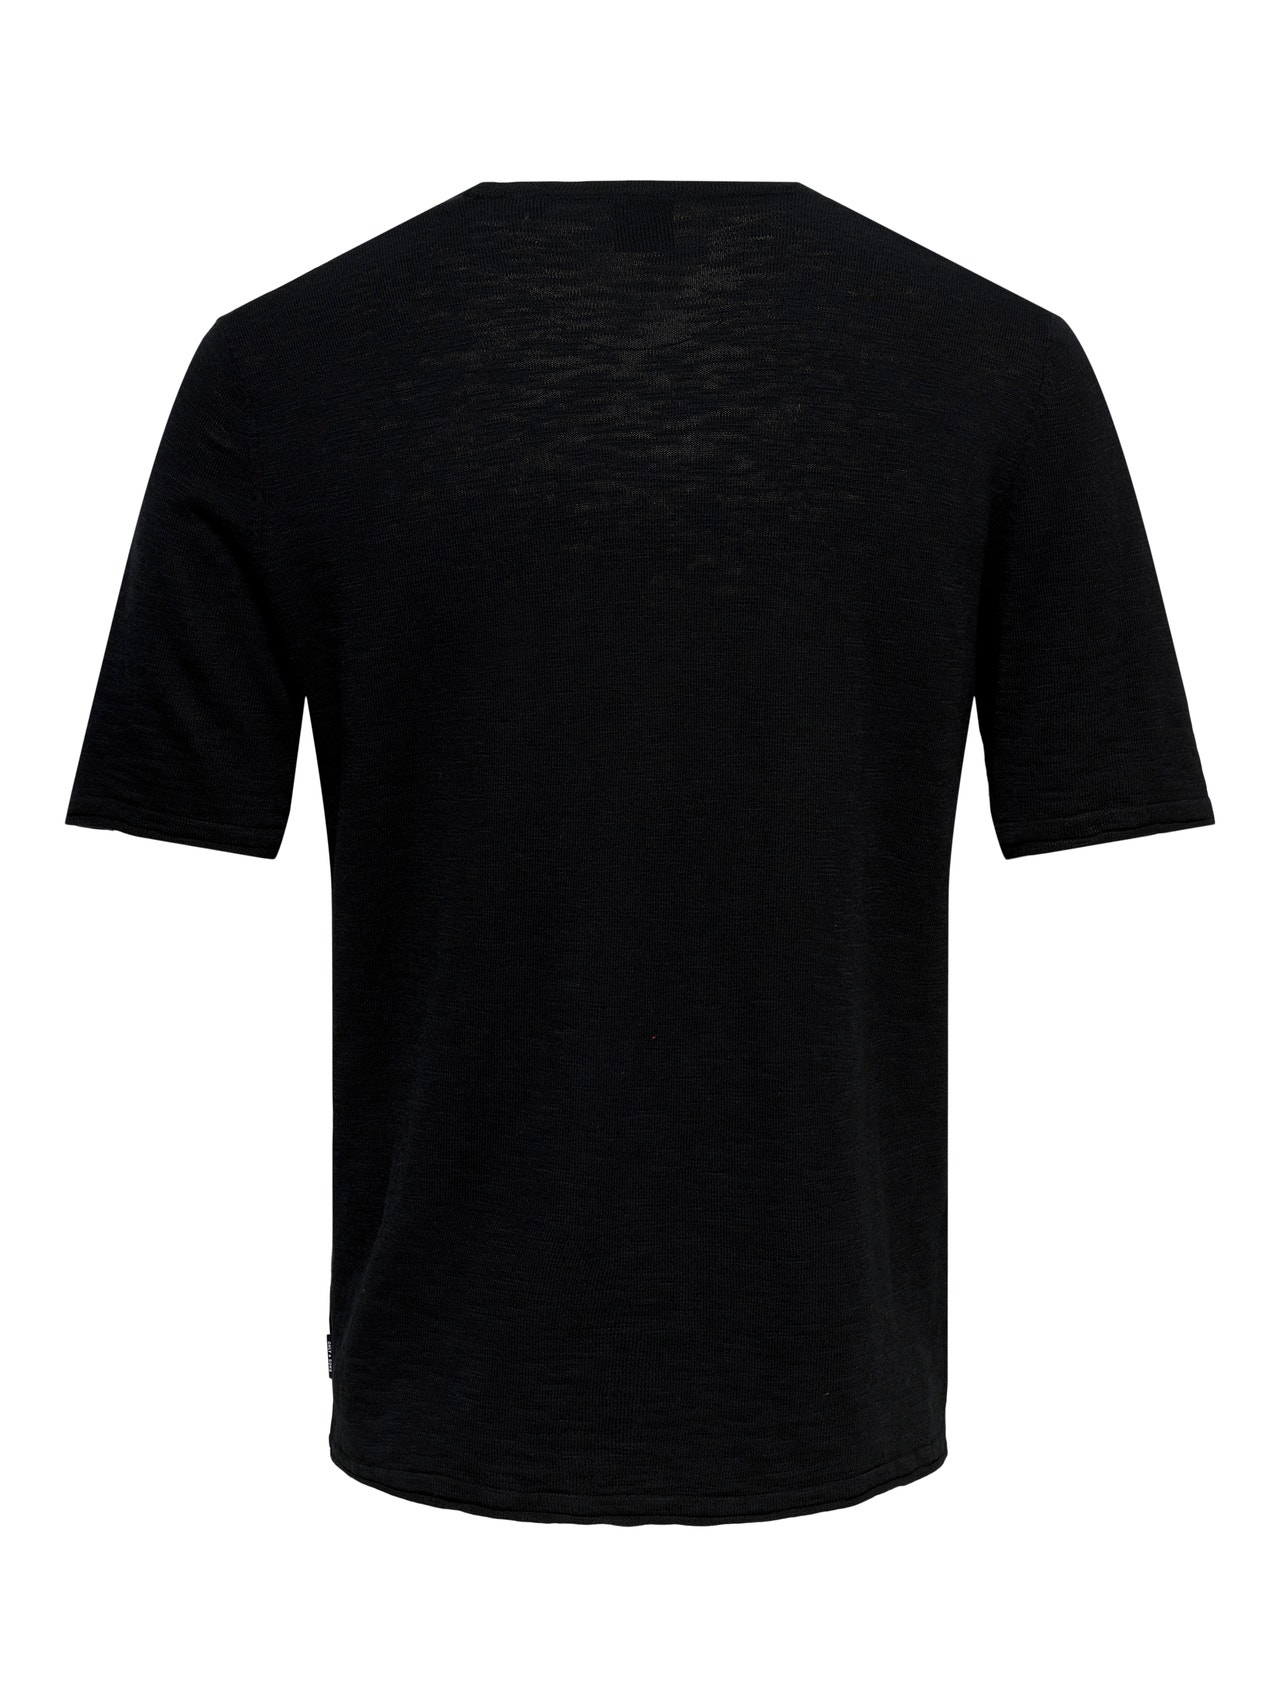 ONLY & SONS Knitted t-shirt -Black - 22021635